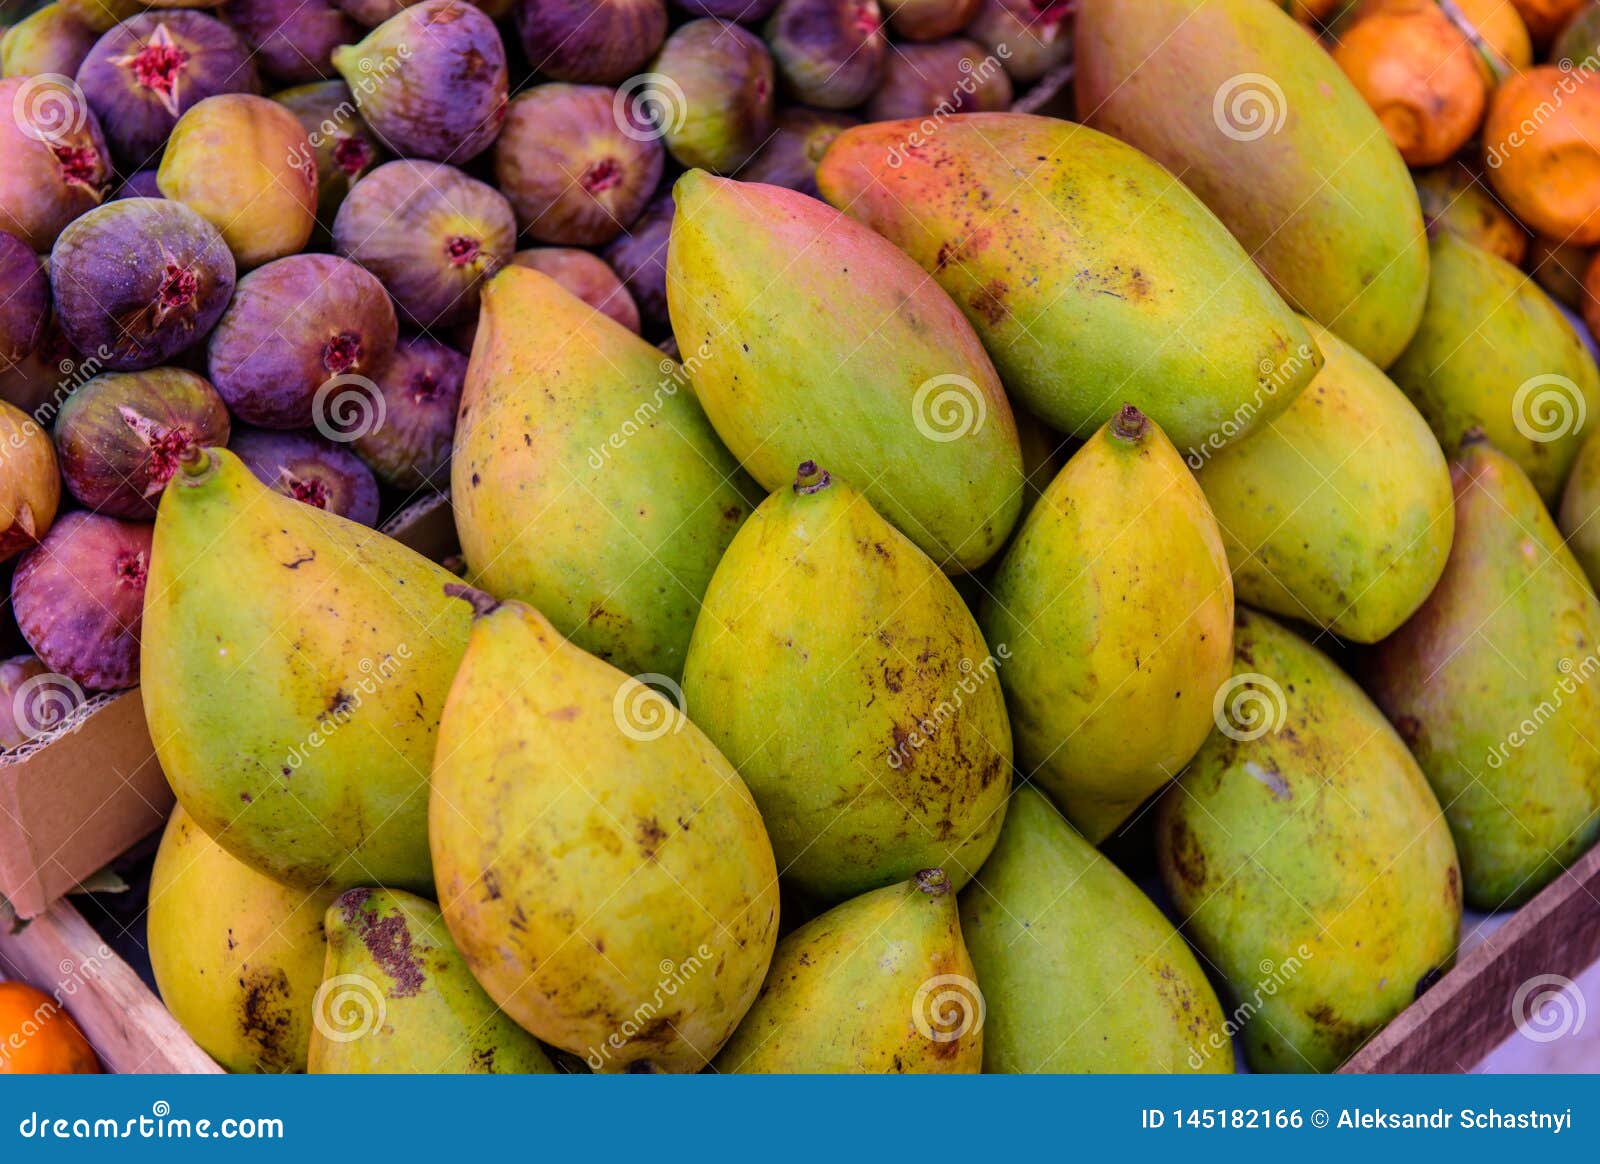 group of fresh mango and figs